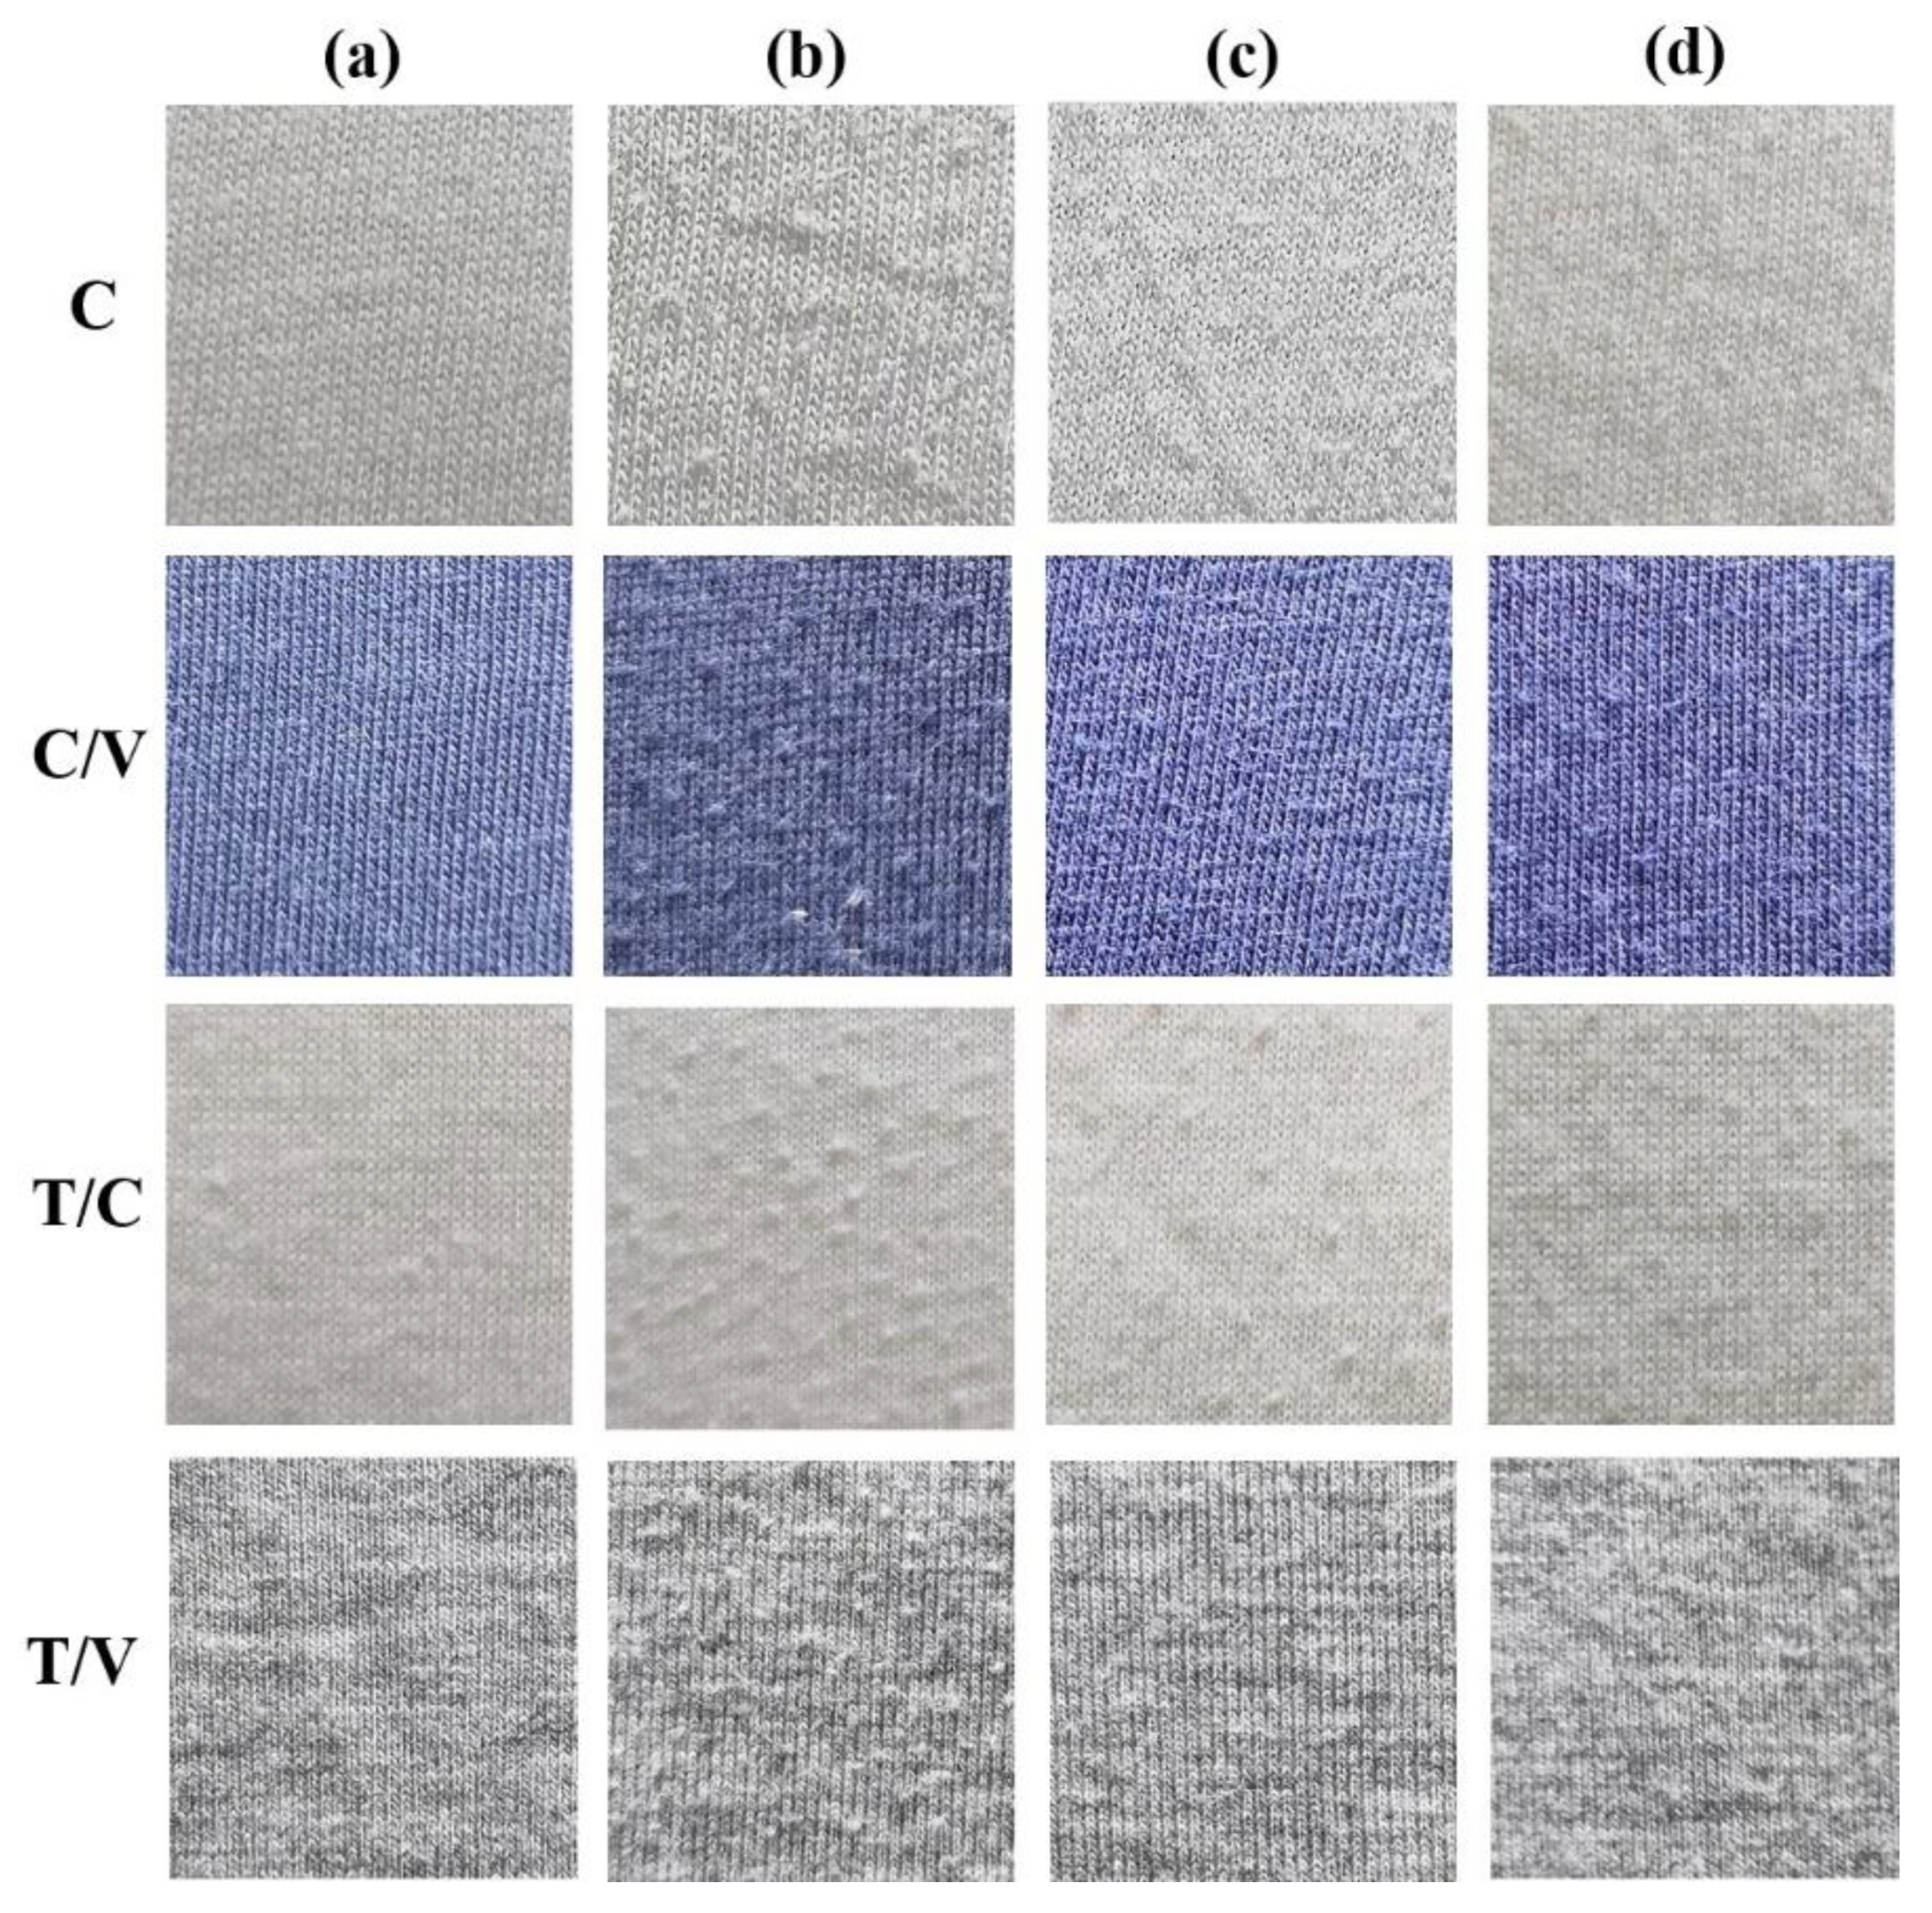 Coatings Free Full Text Improving The Anti Pilling Performance Of Cellulose Fiber Blended Knitted Fabrics With 2 4 6 Trichloropyrimidine Treatment Html